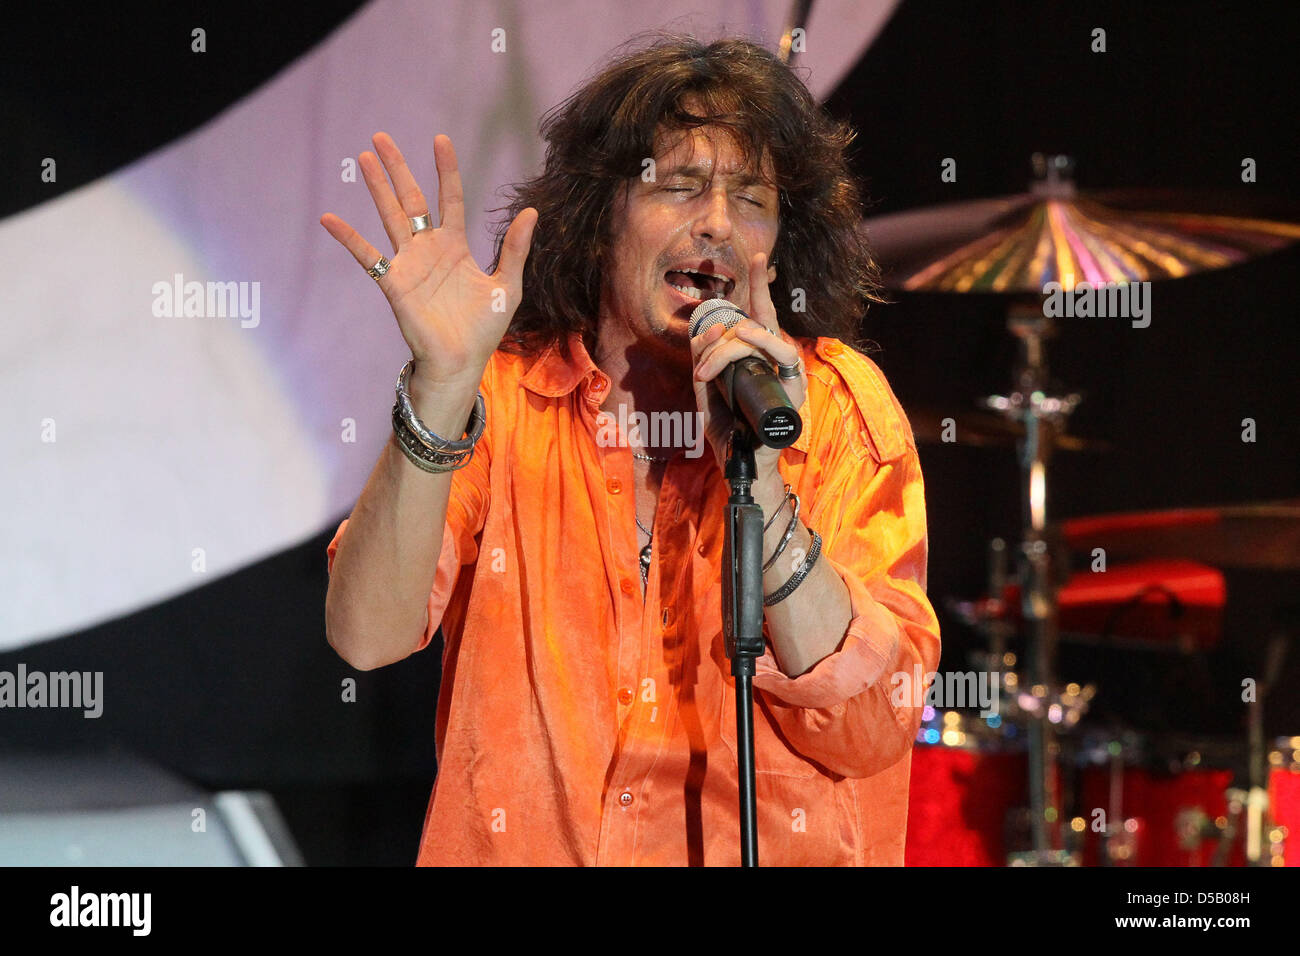 A handout picture taken on 28 July shows Kelly Hansen, singer of the band Foreigner, at their 'Can't Slow Down Tour 2010' in Bochum, Germany, July 28, 2010. Photo: Revierfoto Stock Photo